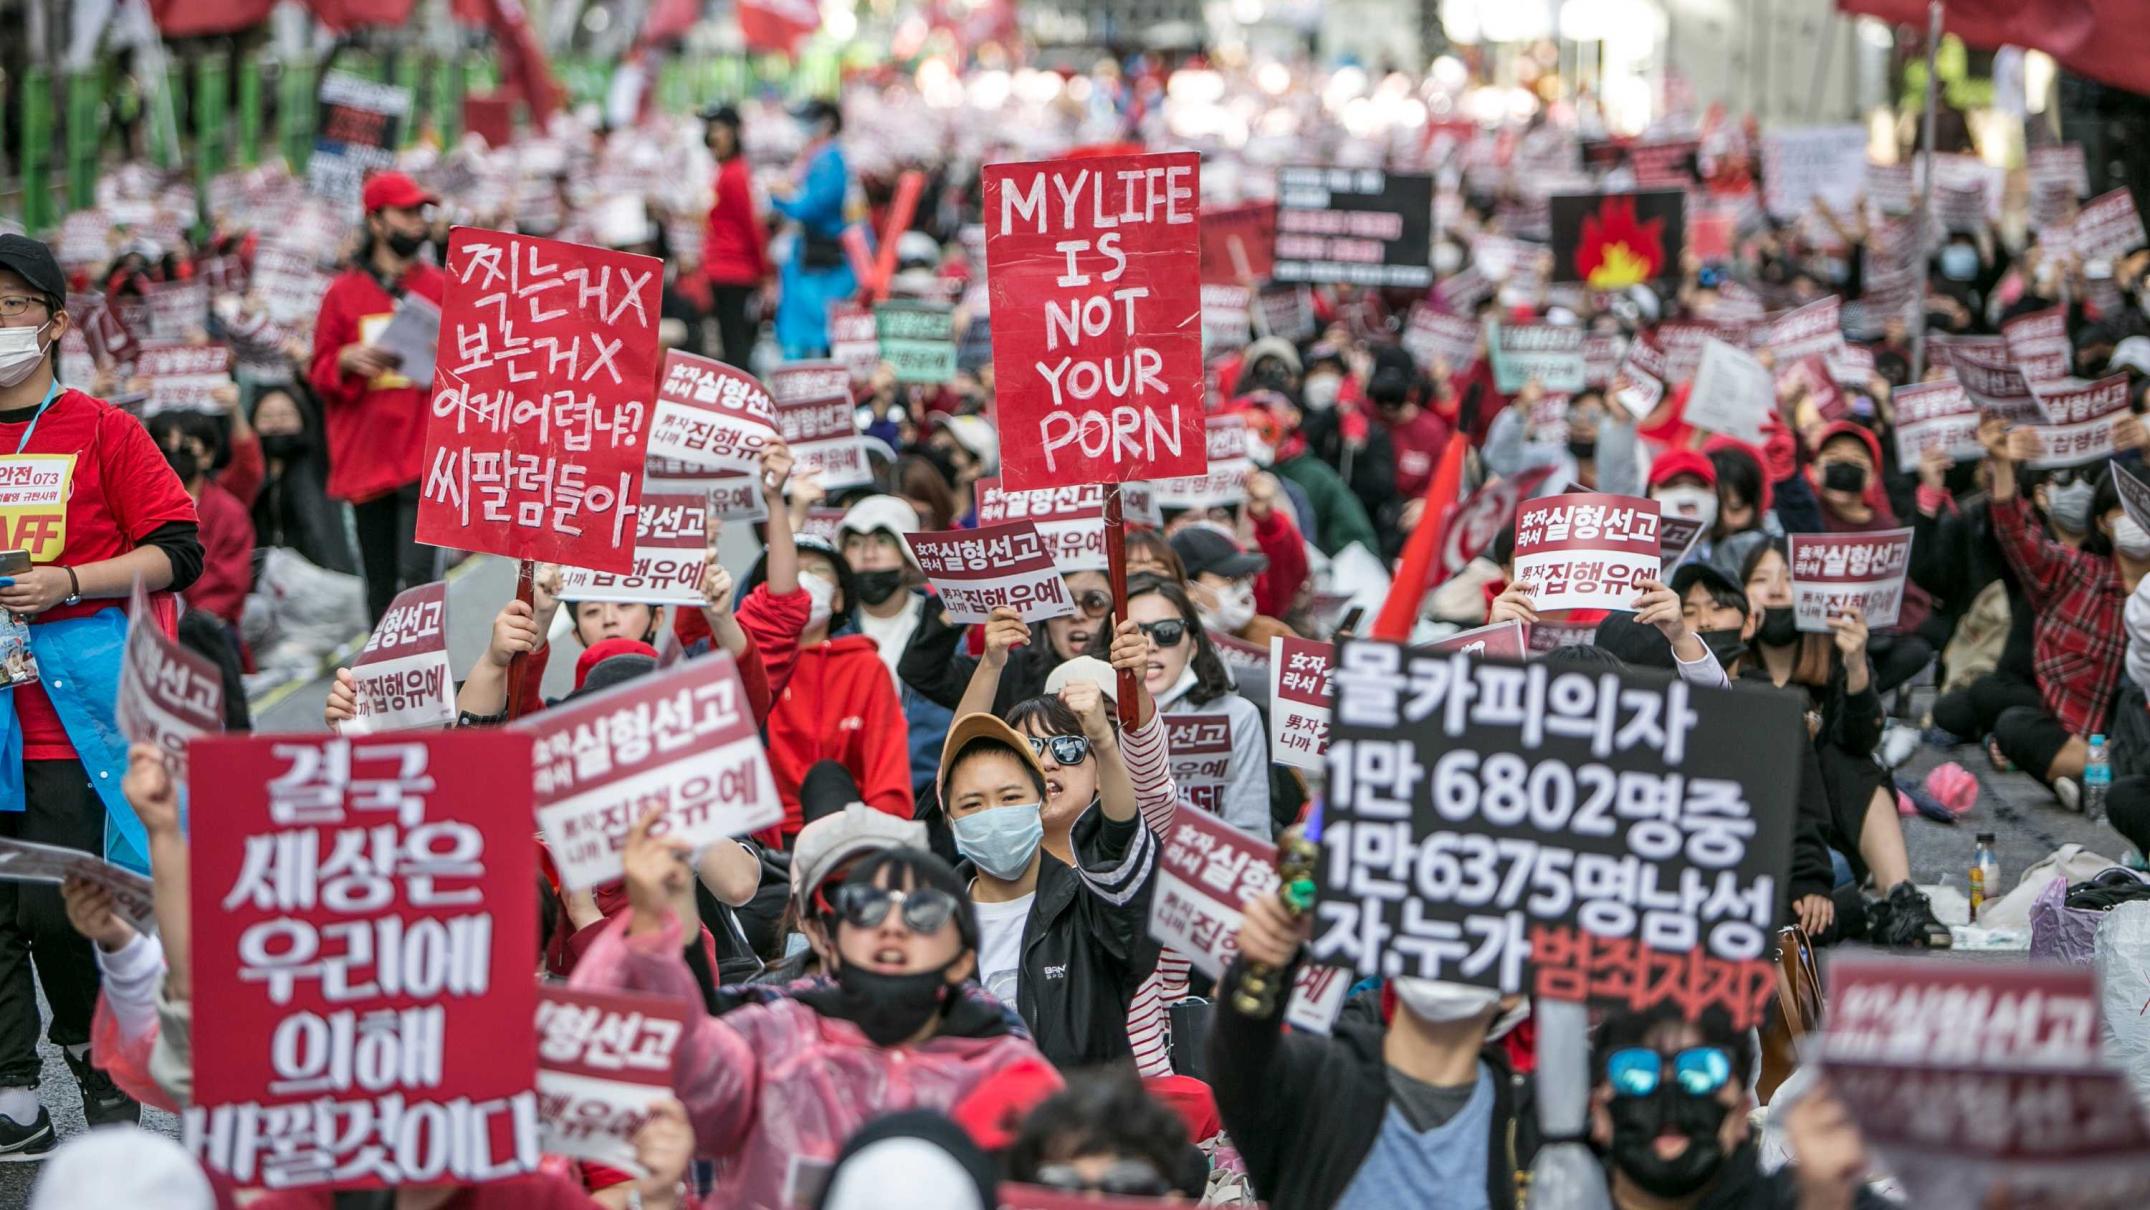 Digital crimes in South Korea and their effect on feminism